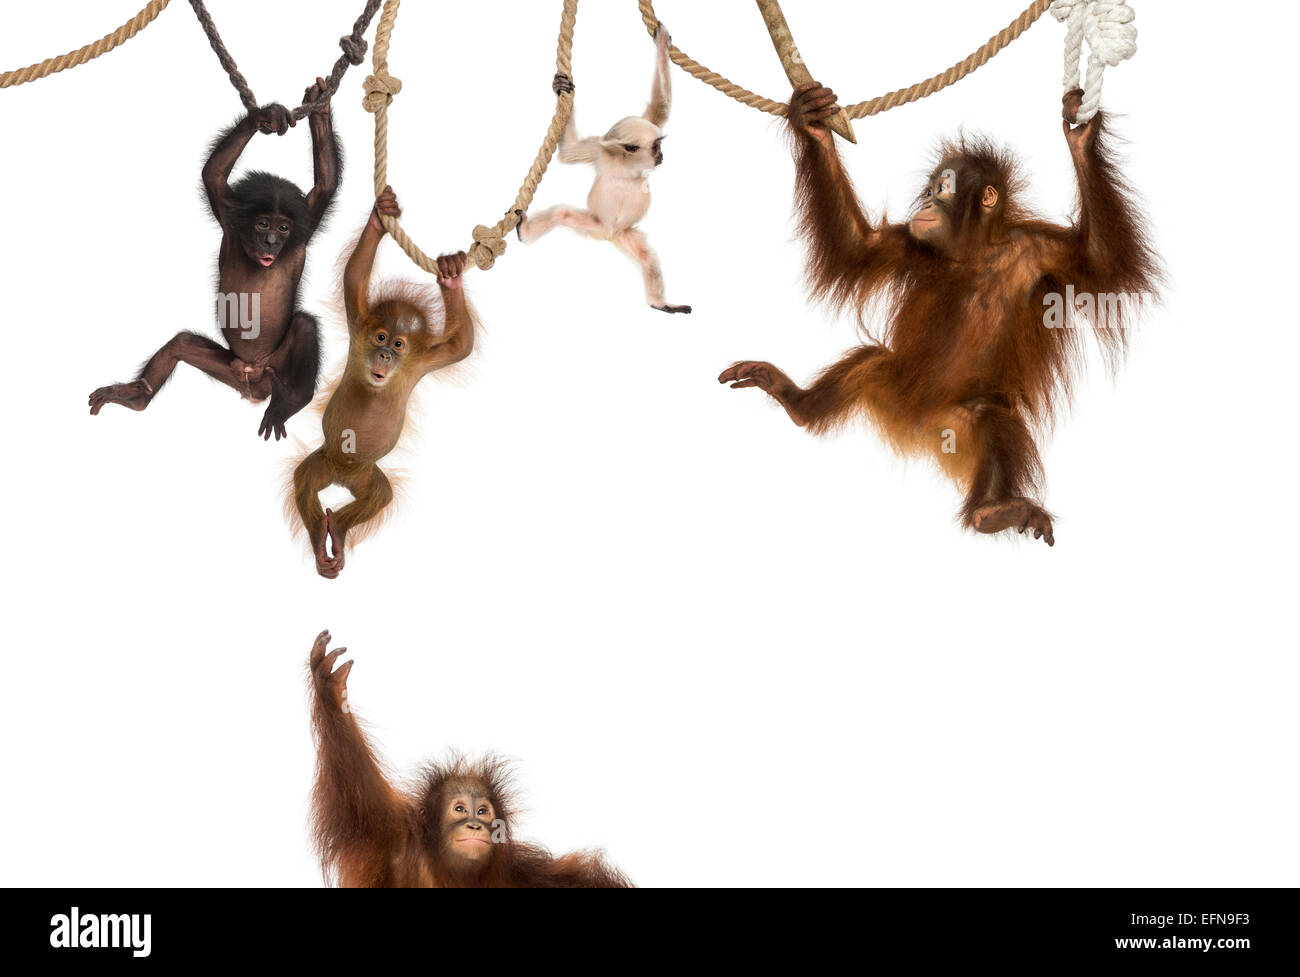 Young Orangutan, Young Pileated Gibbon and Young Bonobo hanging on ropes against white background Stock Photo